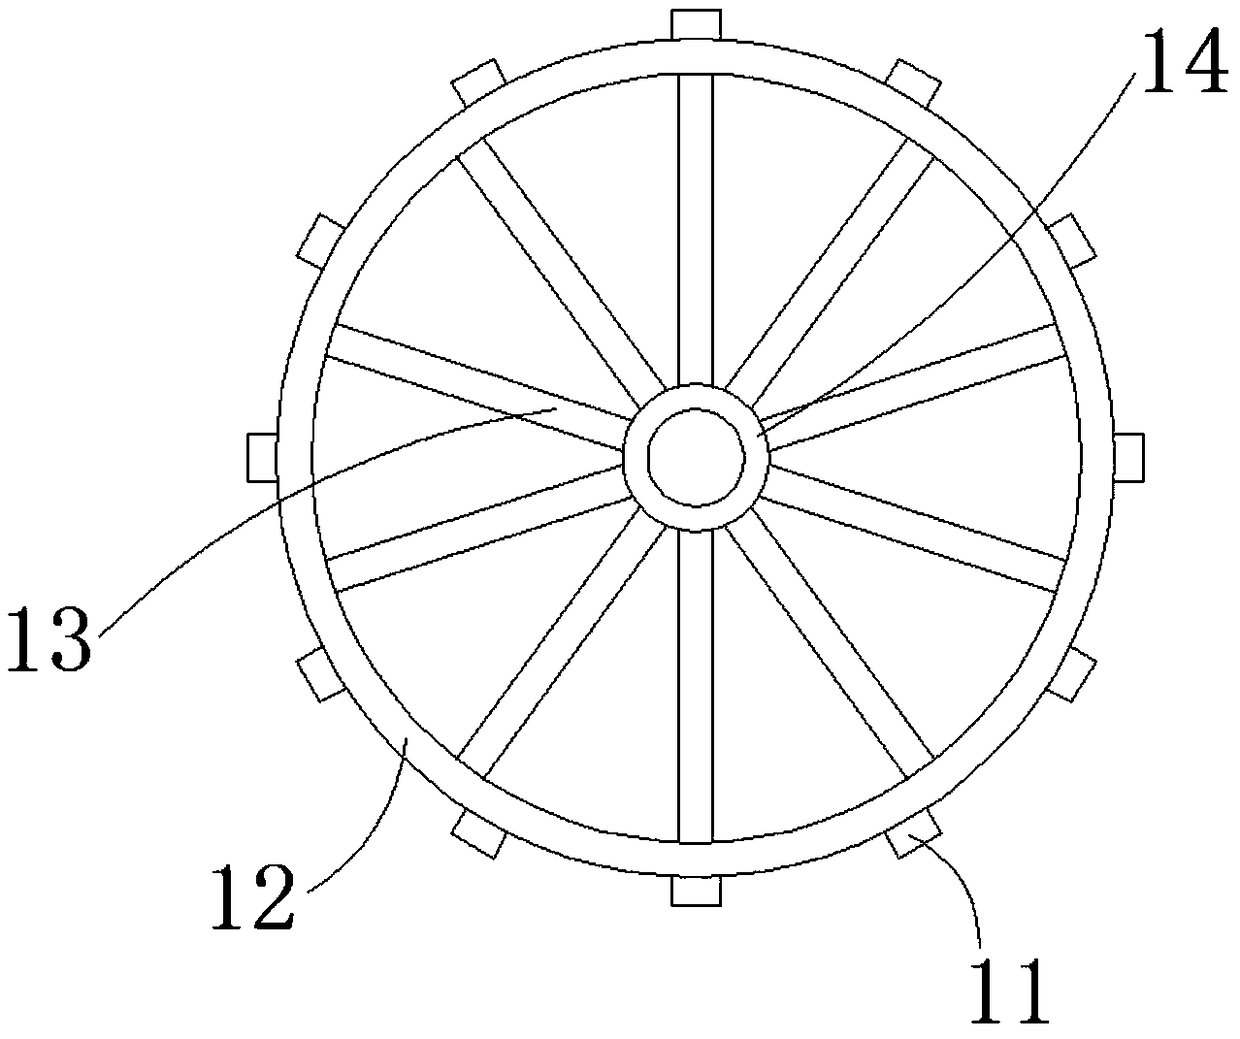 Raw material stirring device for manufacture of plastic shells for electronic products